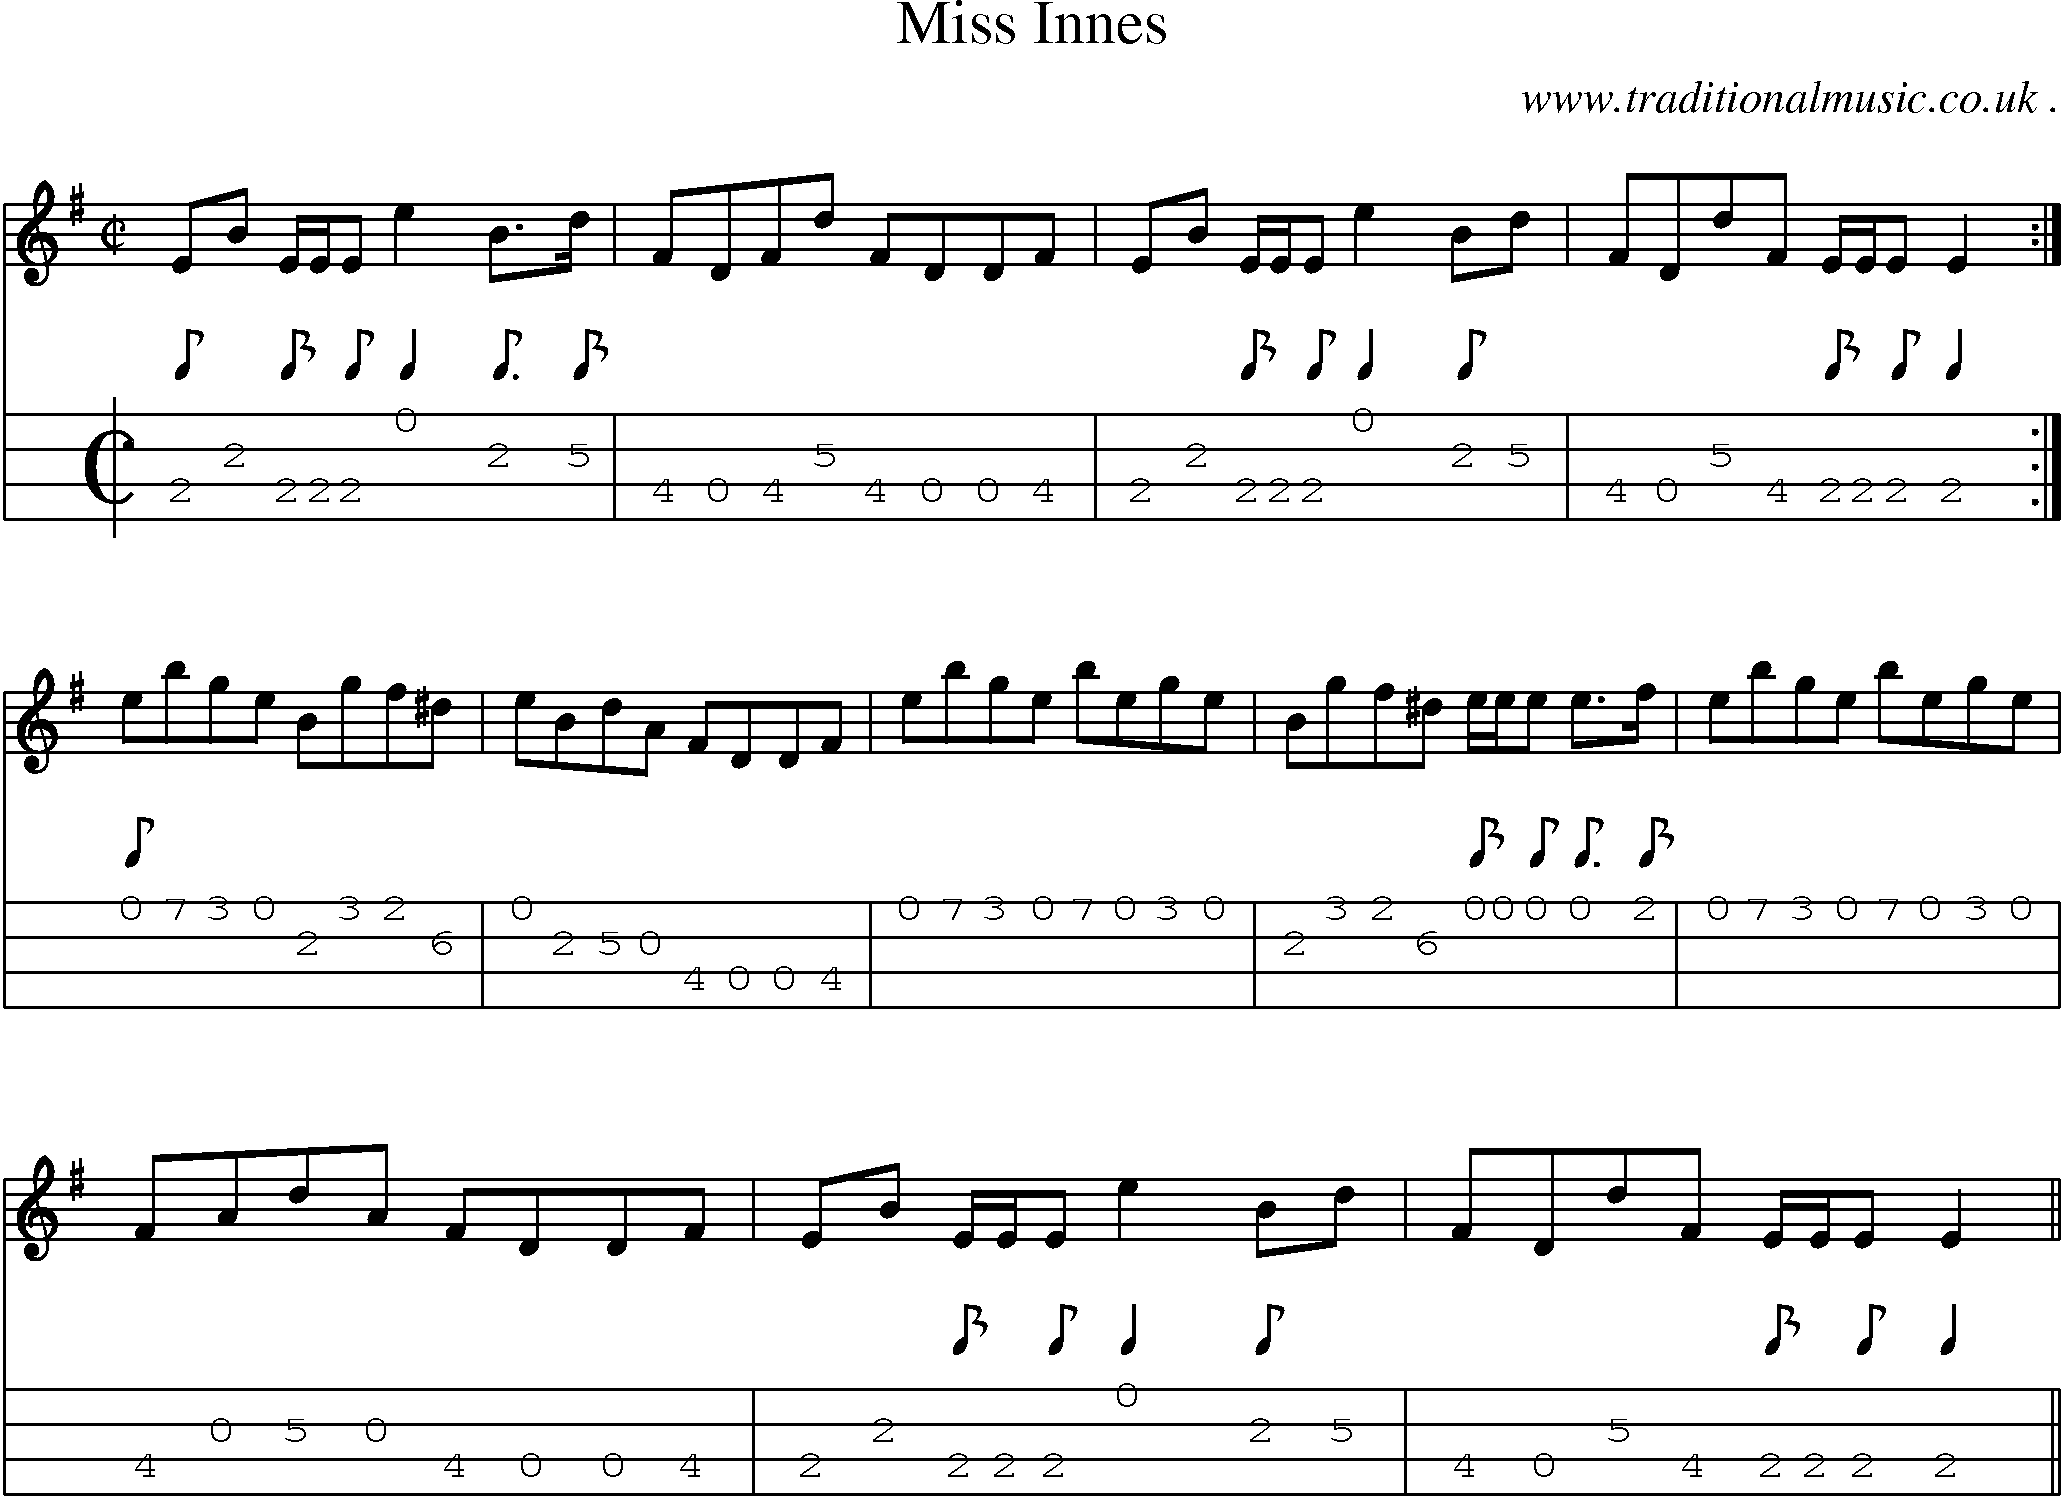 Sheet-music  score, Chords and Mandolin Tabs for Miss Innes